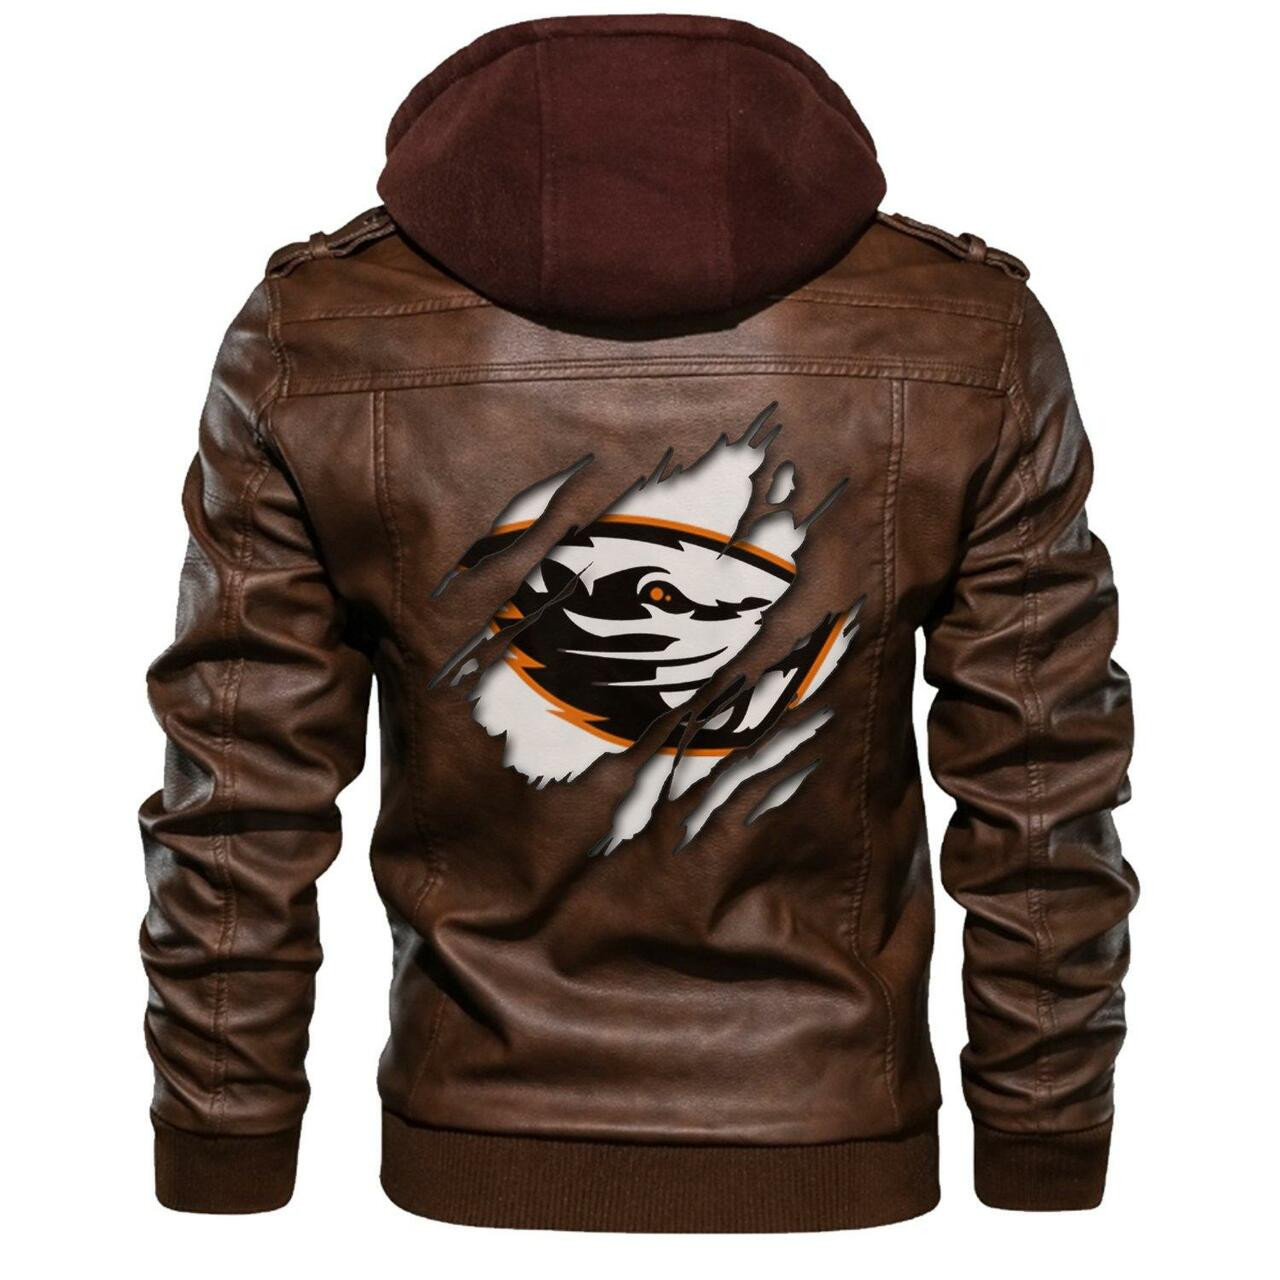 This leather Jacket will look great on you and make you stand out from the crowd 103